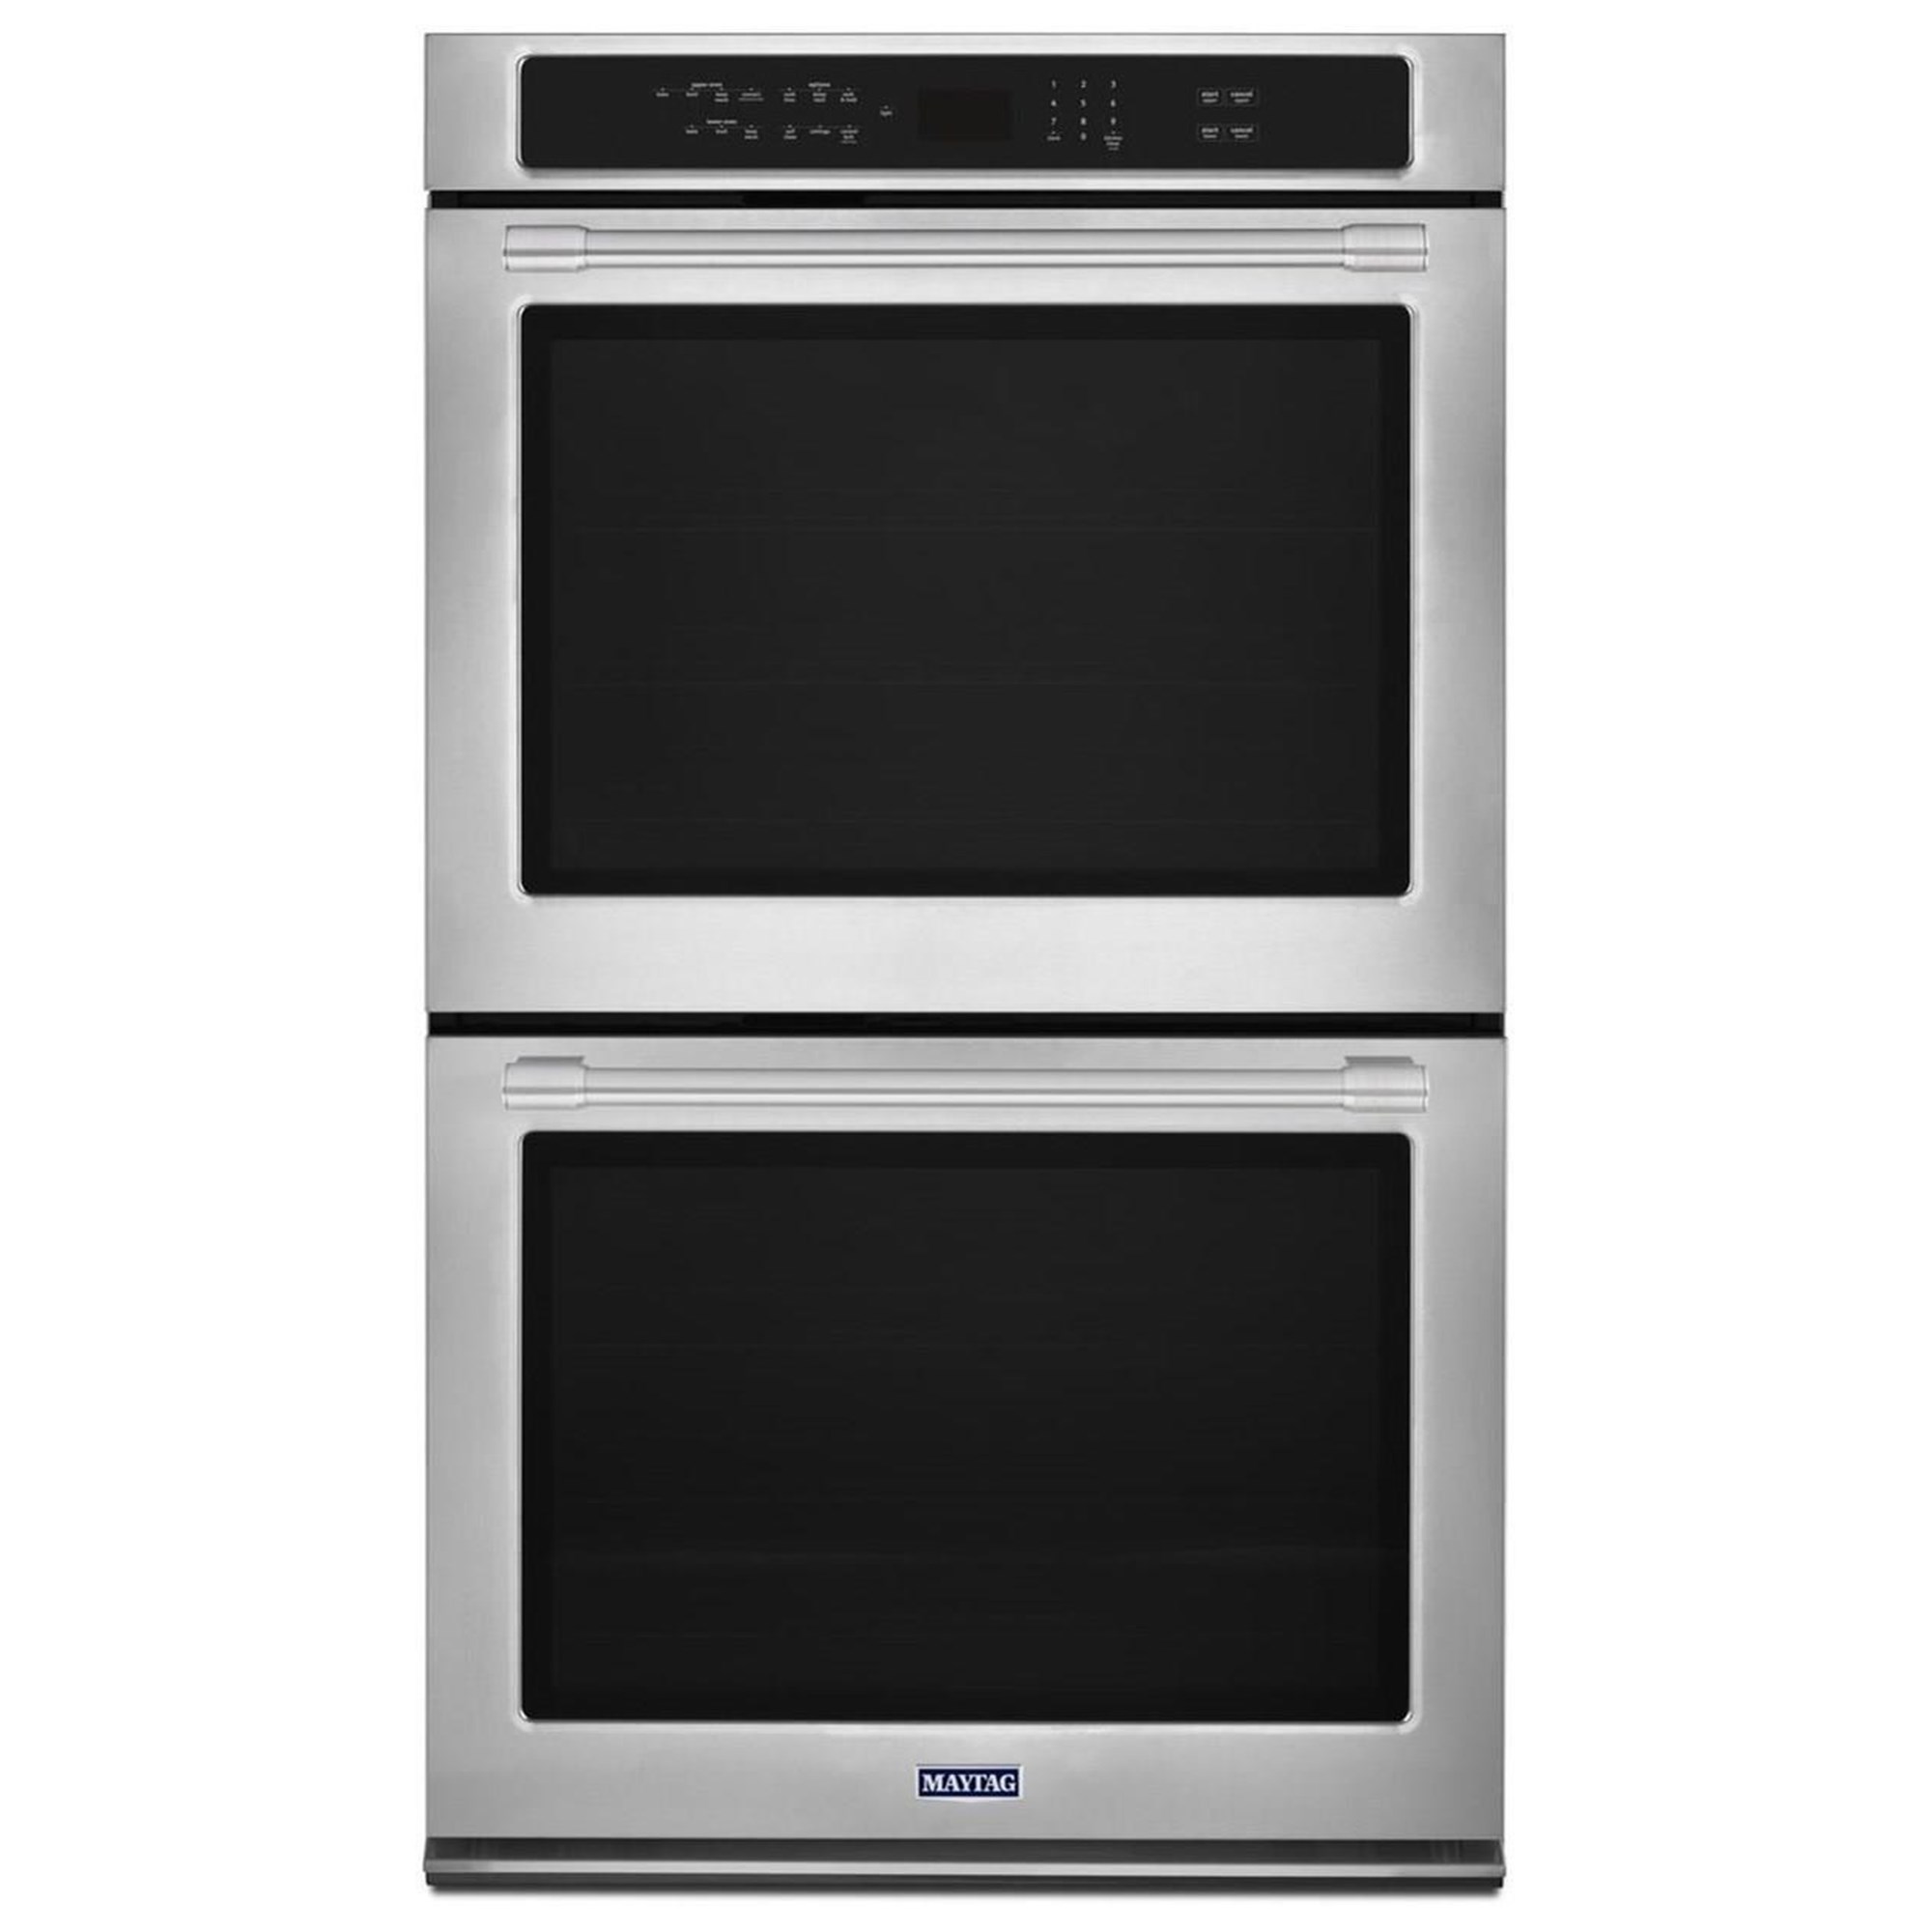 https://imageresizer4.furnituredealer.net/img/remote/images.furnituredealer.net/img/products%2Fmaytag%2Fcolor%2Fbuilt-in%20electric%20double%20oven%20-%201158382308_mew9630fz-b1.jpg?width=2000&height=2000&scale=both